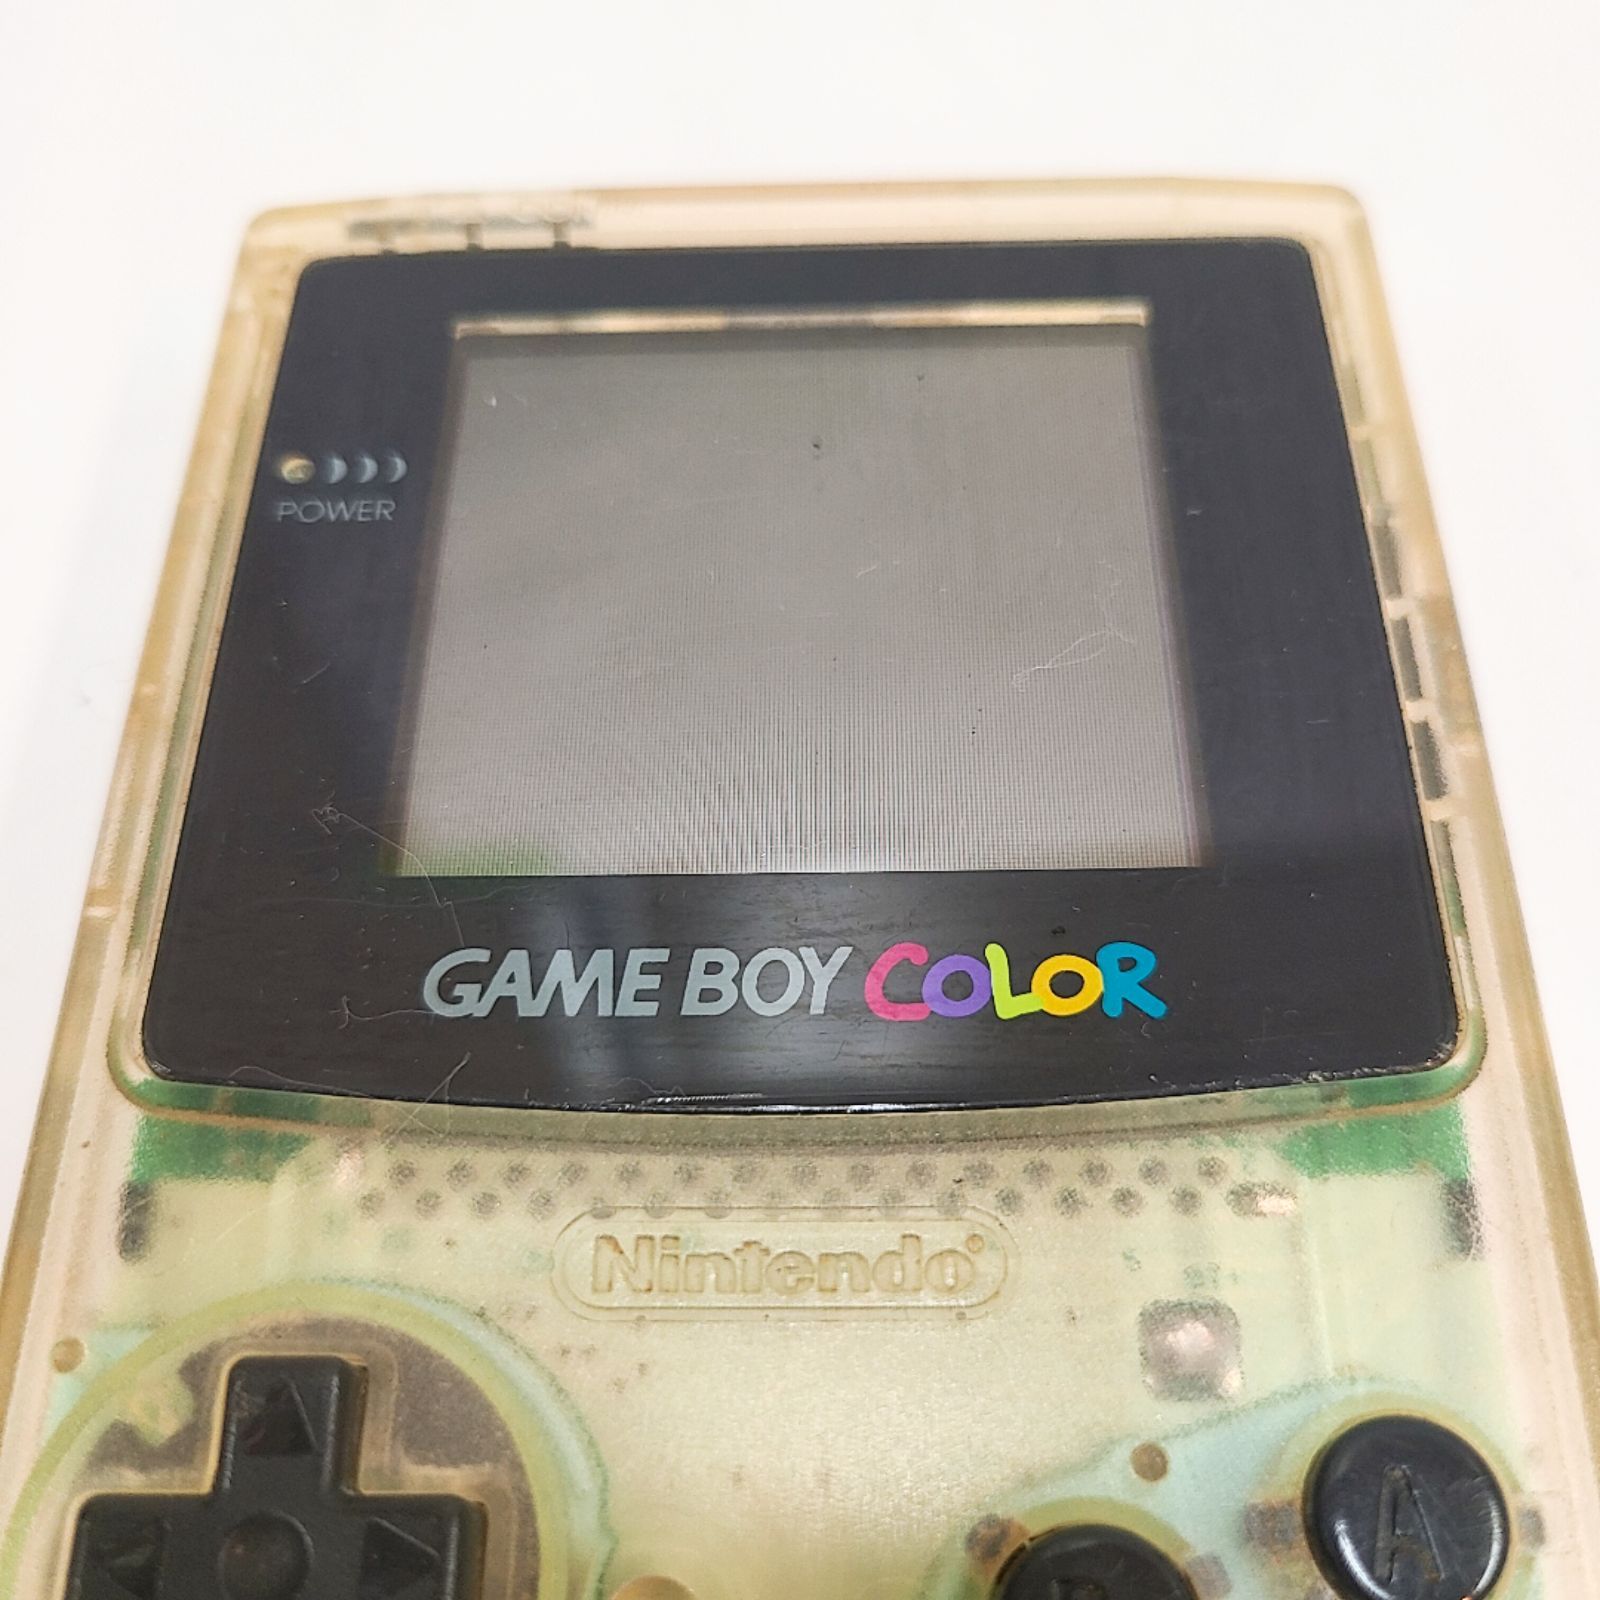 GAMEBOY COLOR ゲームボーイ カラー 本体 クリア ジャンク